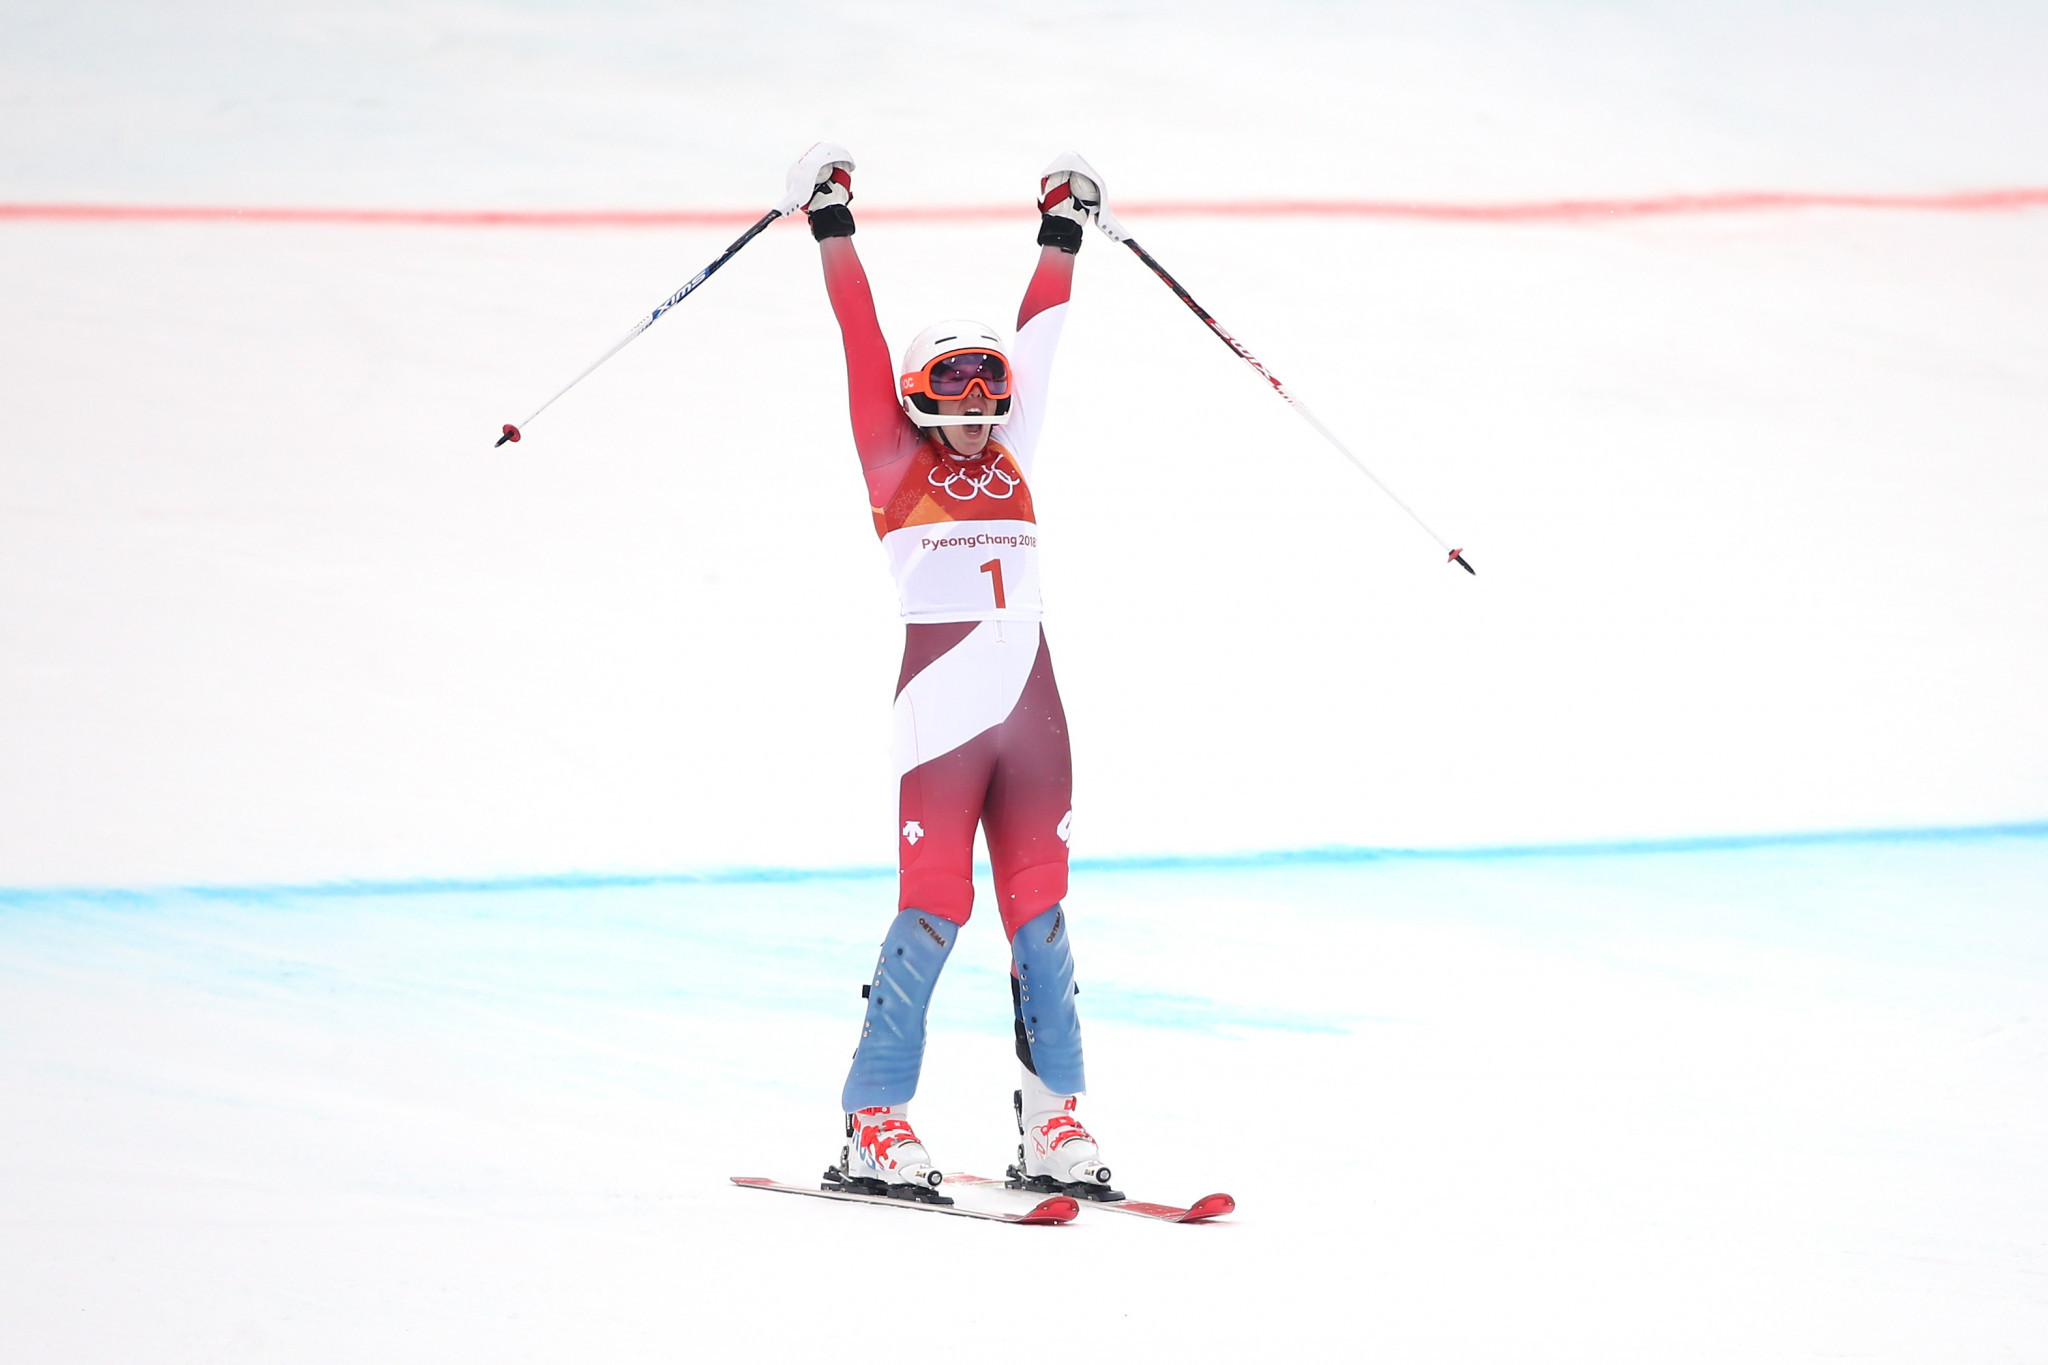 Switzerland’s Michelle Gisin held off the challenge of pre-event favourite Mikaela Shiffrin to win the women’s Alpine combined gold medal at Pyeongchang 2018 today ©Getty Images